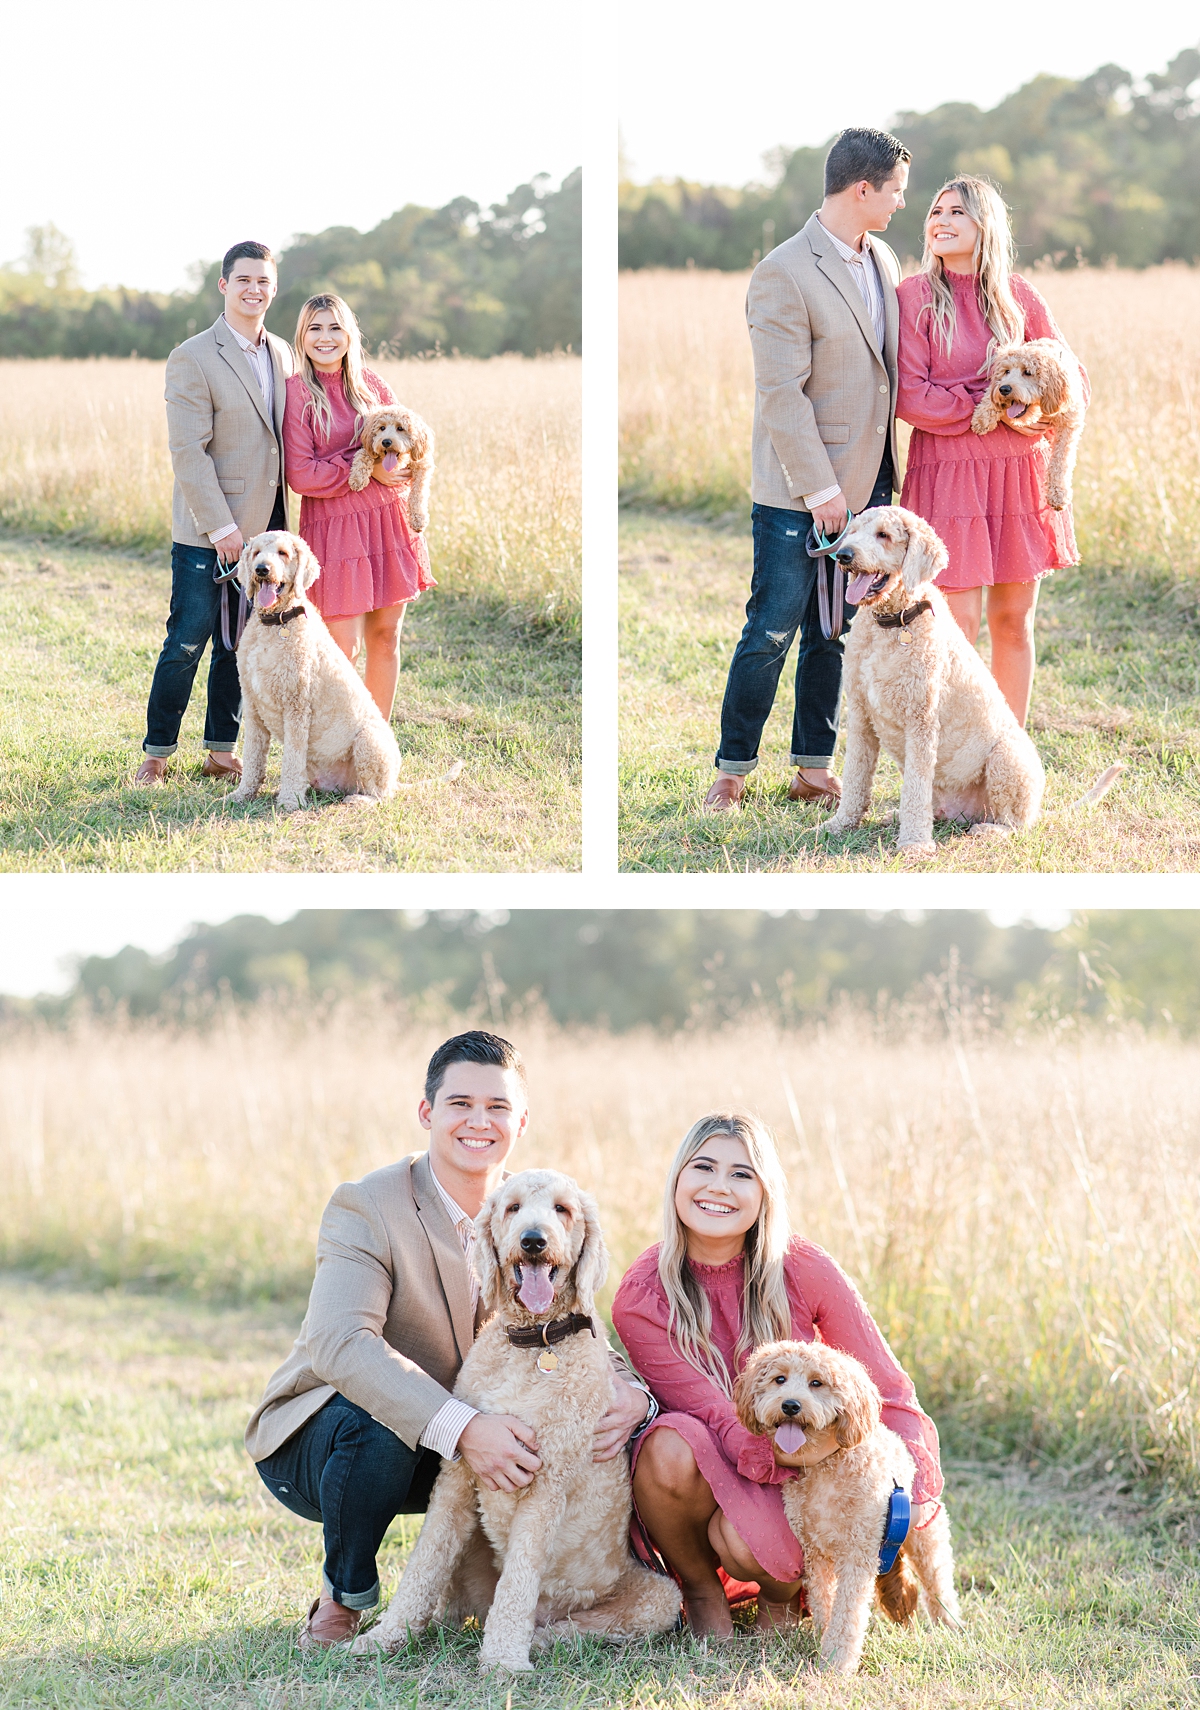 Yorktown Battlefield Engagement Session with Dogs. Photography by Richmond Wedding Photographer Kailey Brianne Photography.